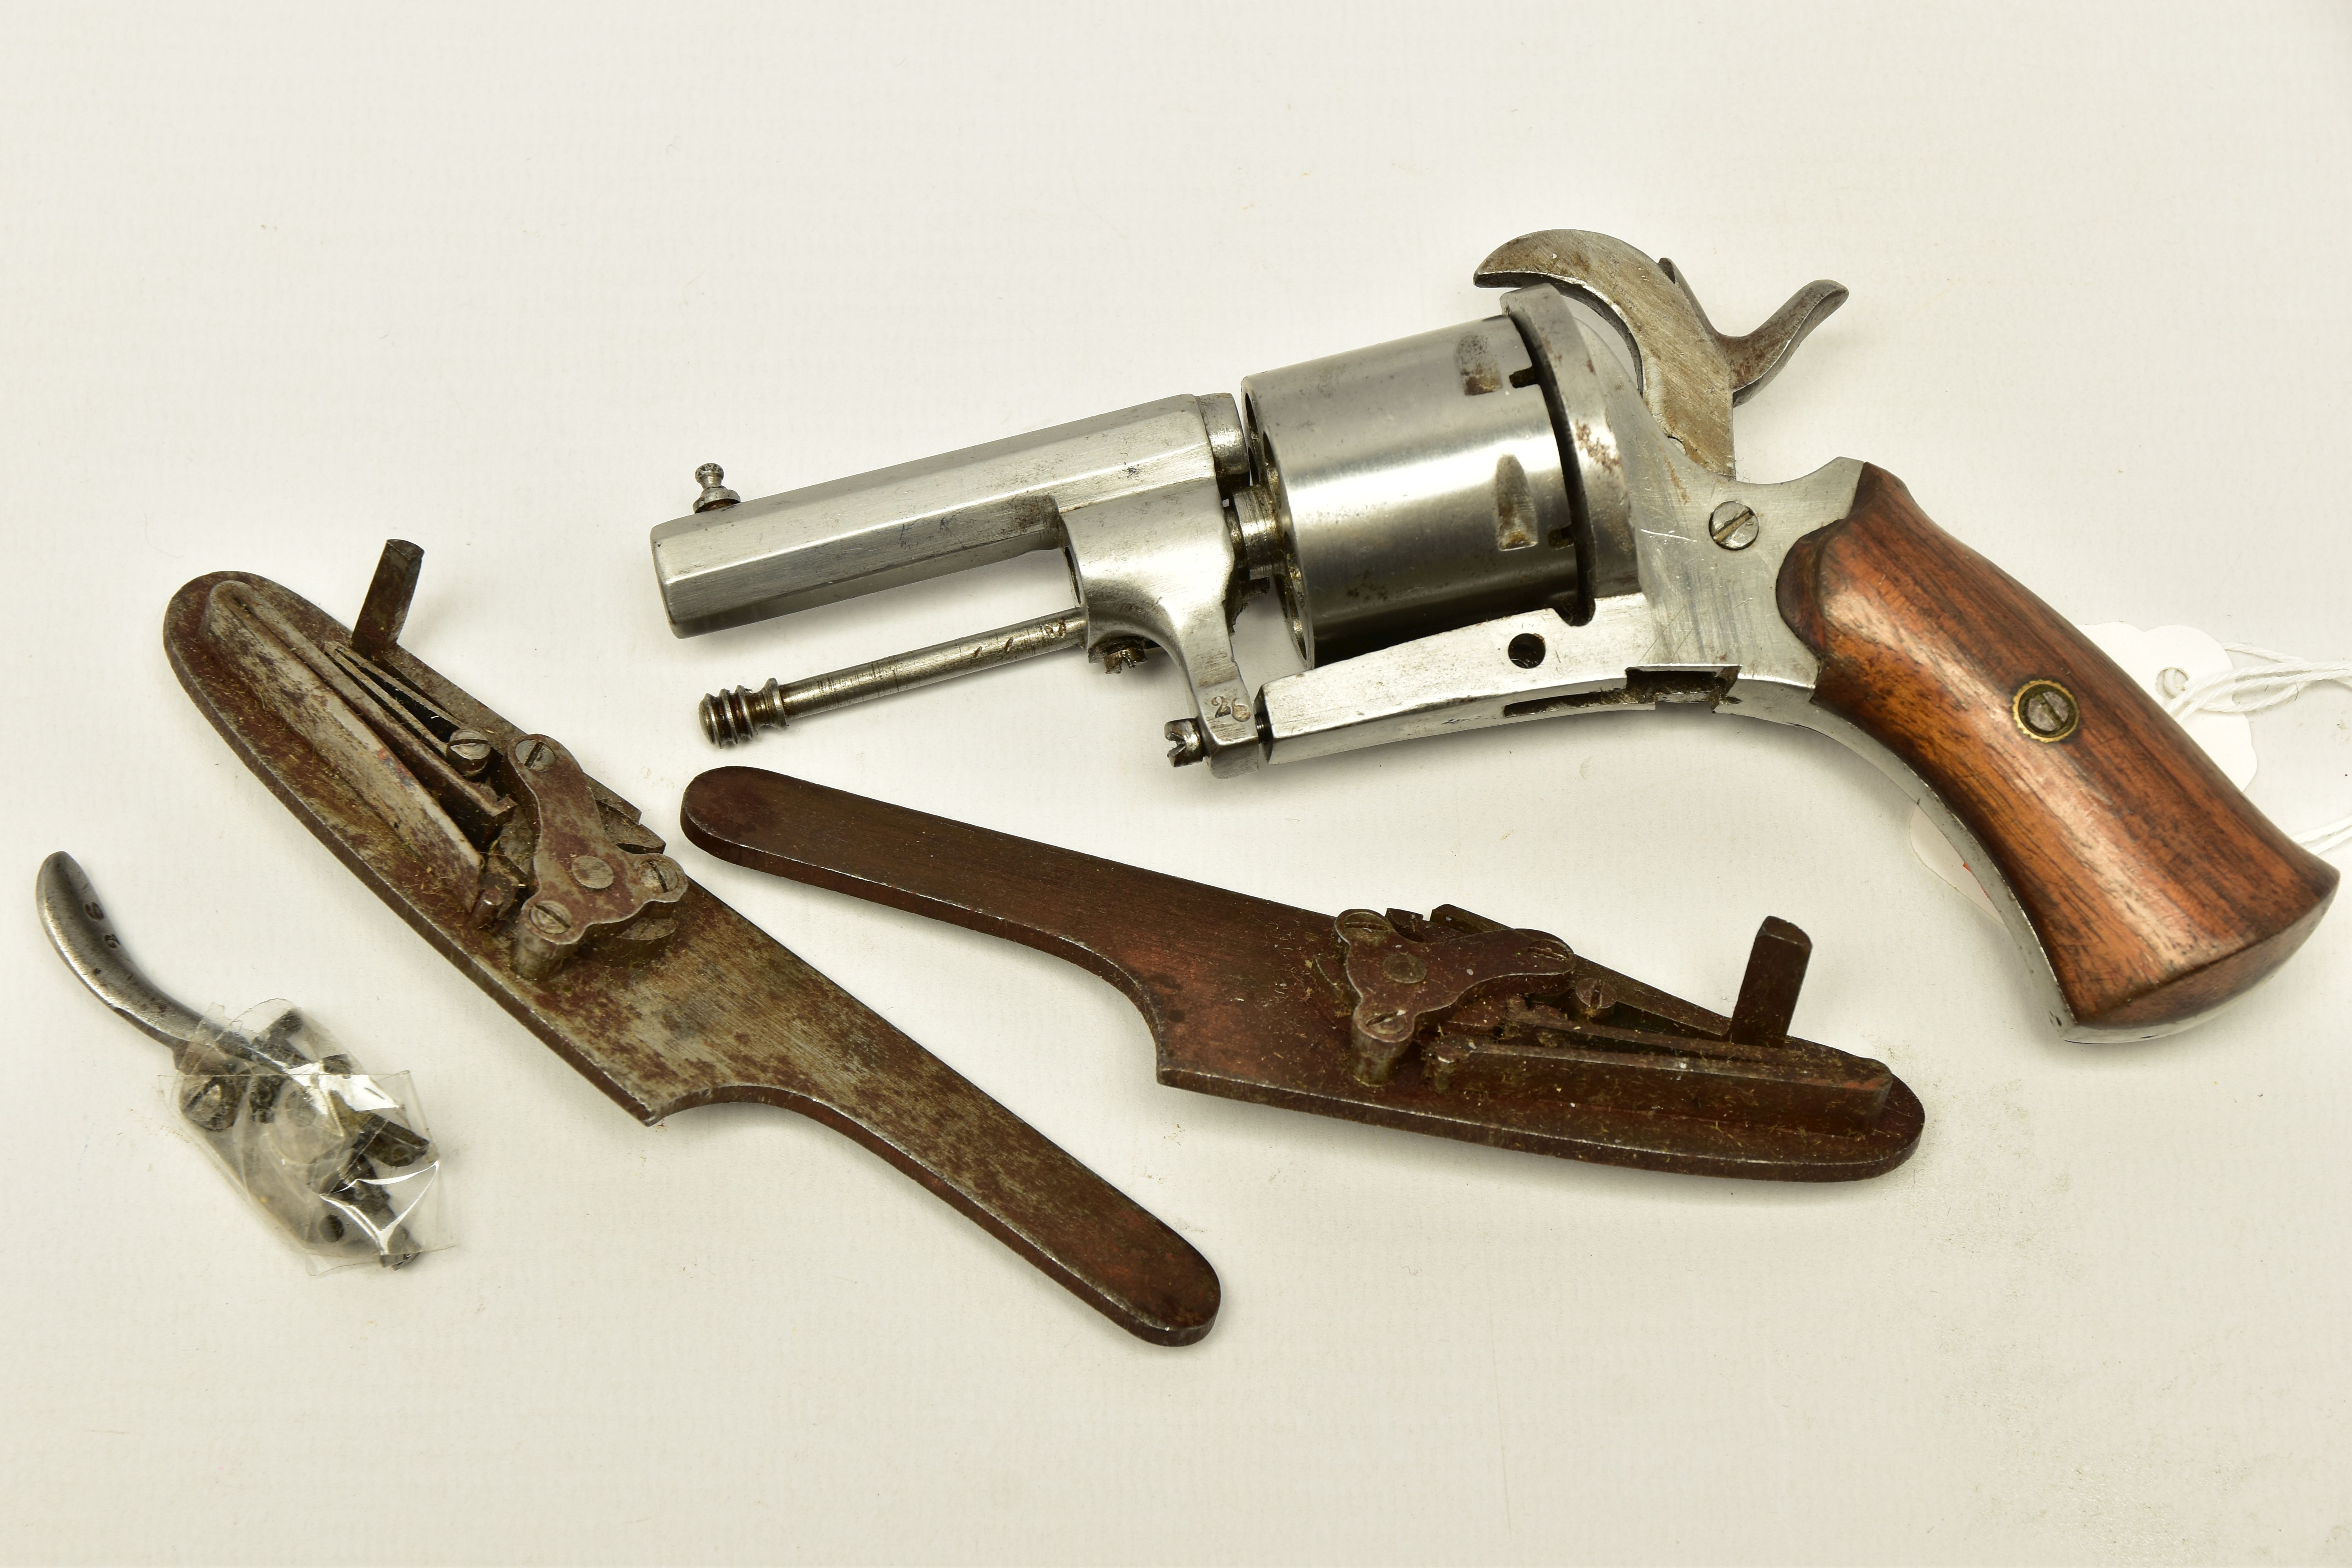 AN ANTIQUE 7MM BELGIAN PROVED PIN-FIRE REVOLVER, partly dismantled and missing its loading gate